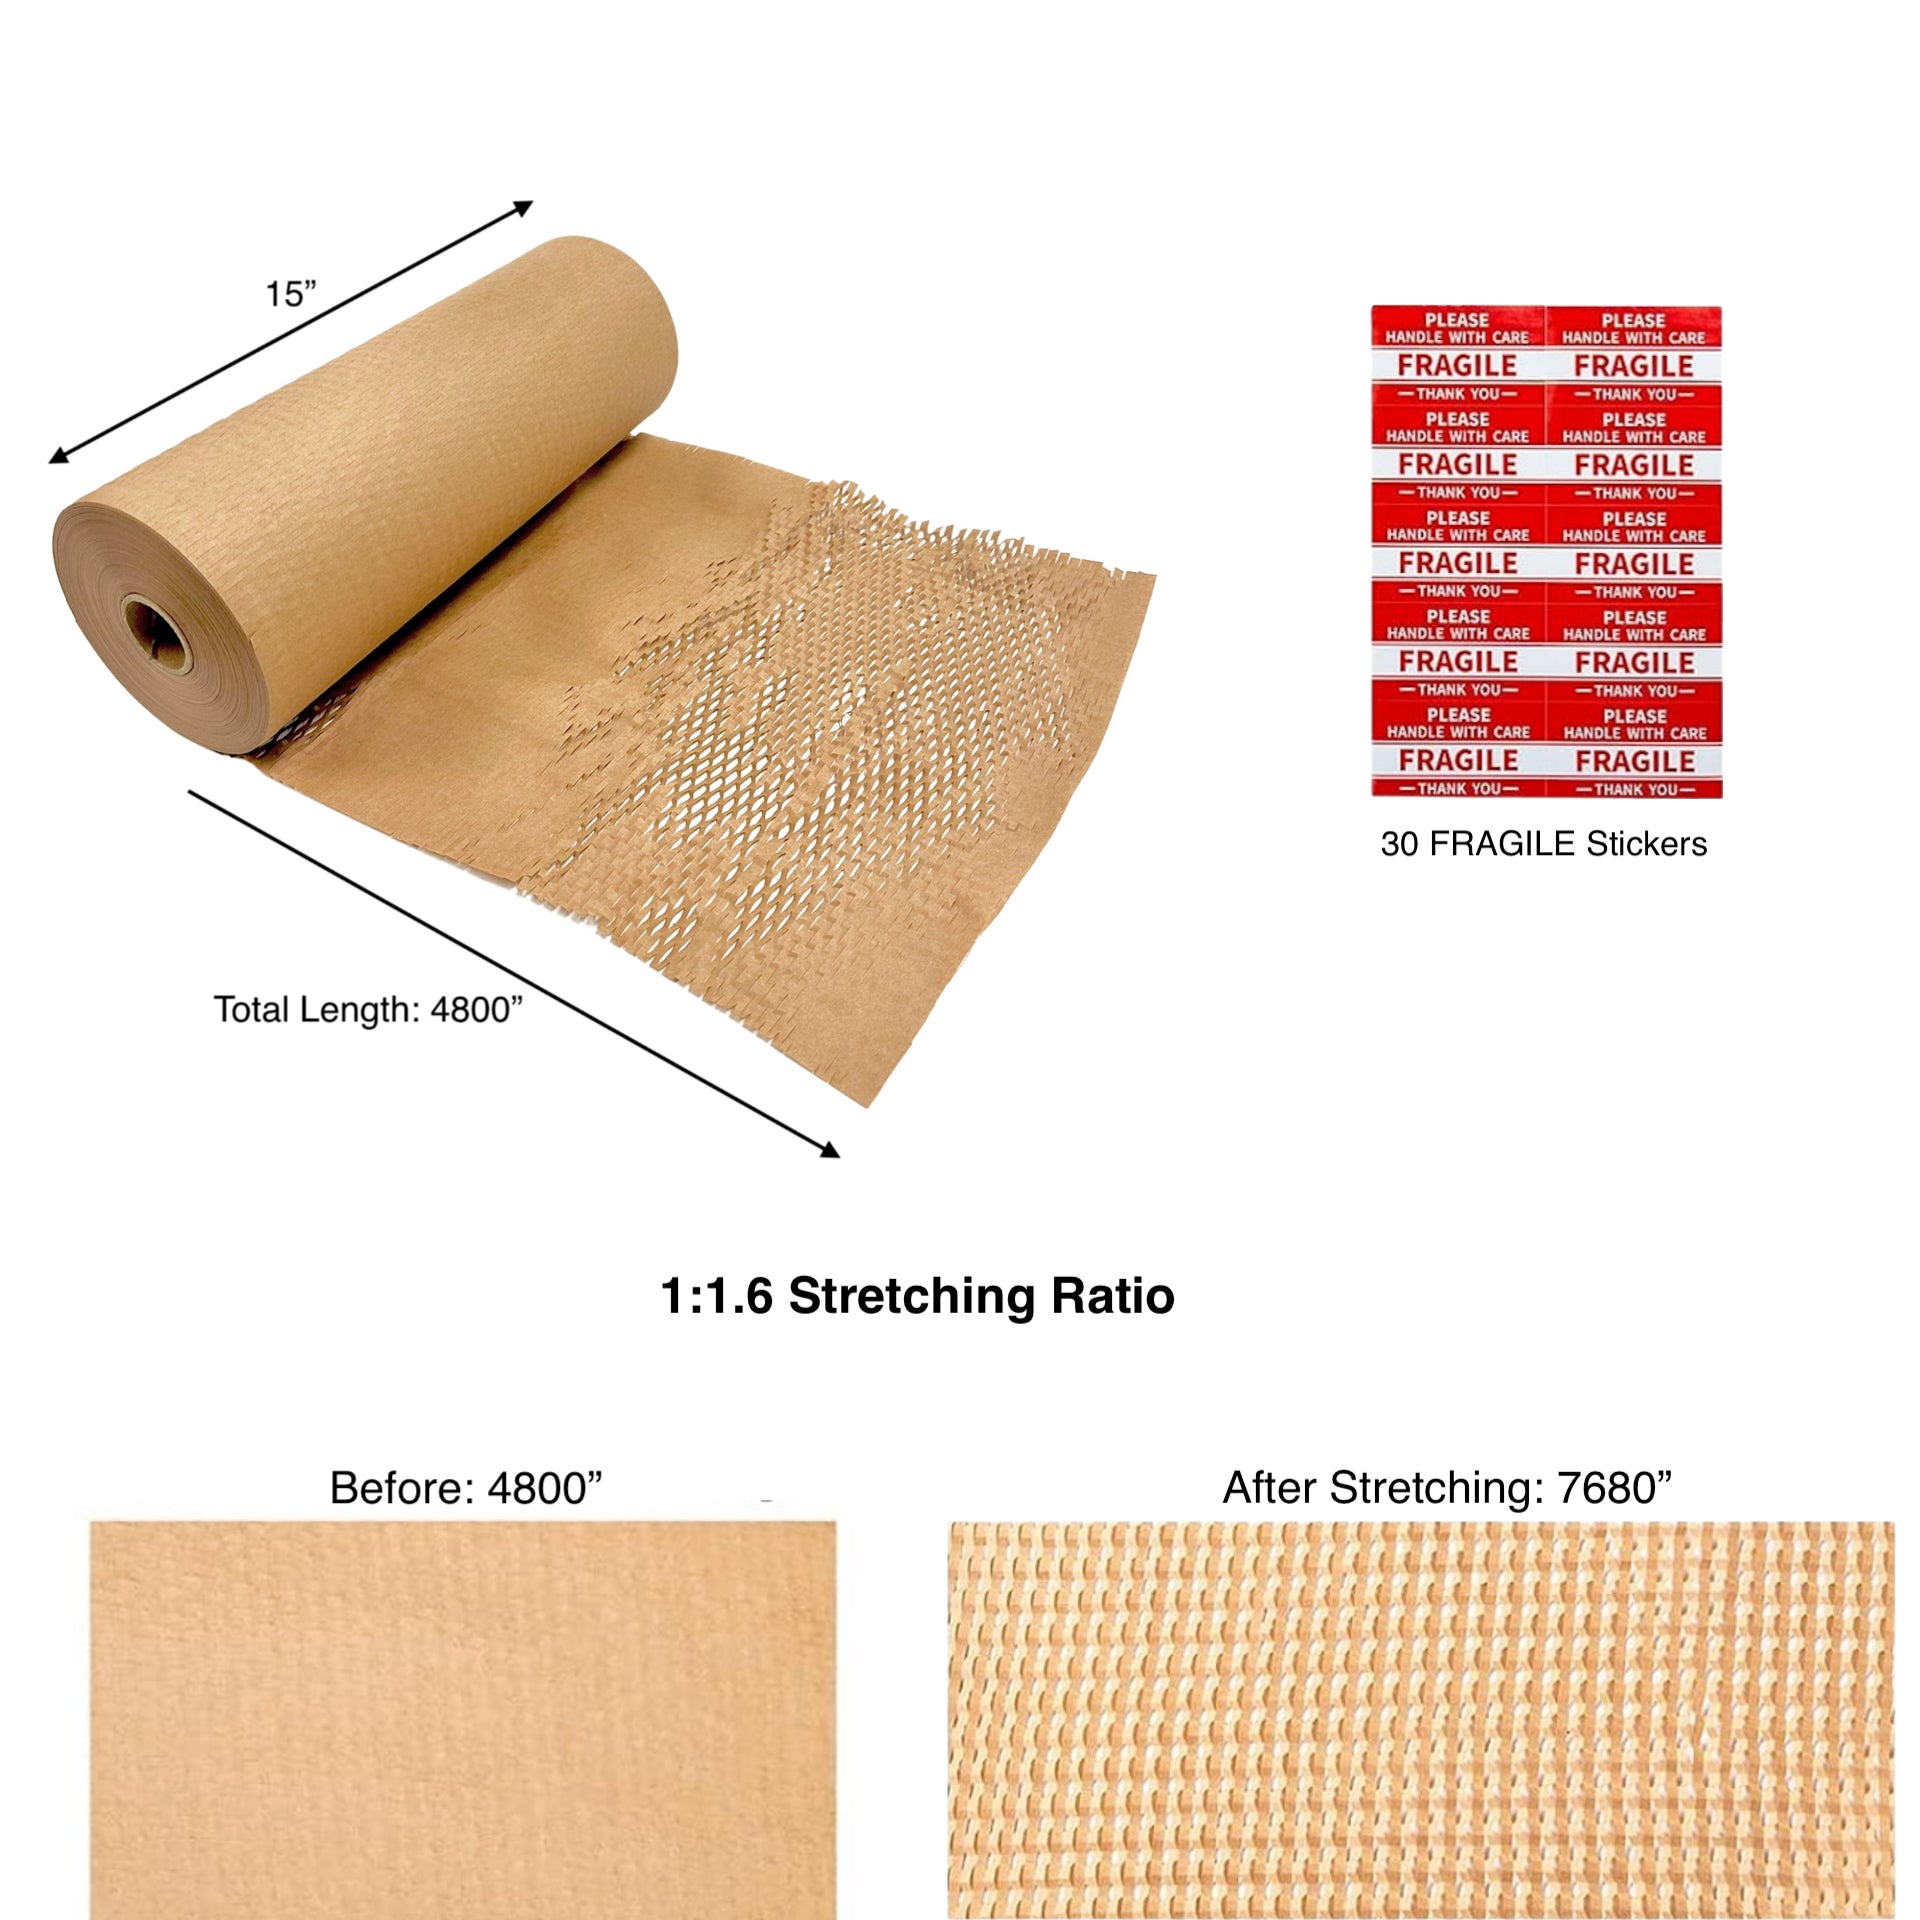 1pcs, Honeycomb, 15x4800 inches, Wrapping Paper Roll